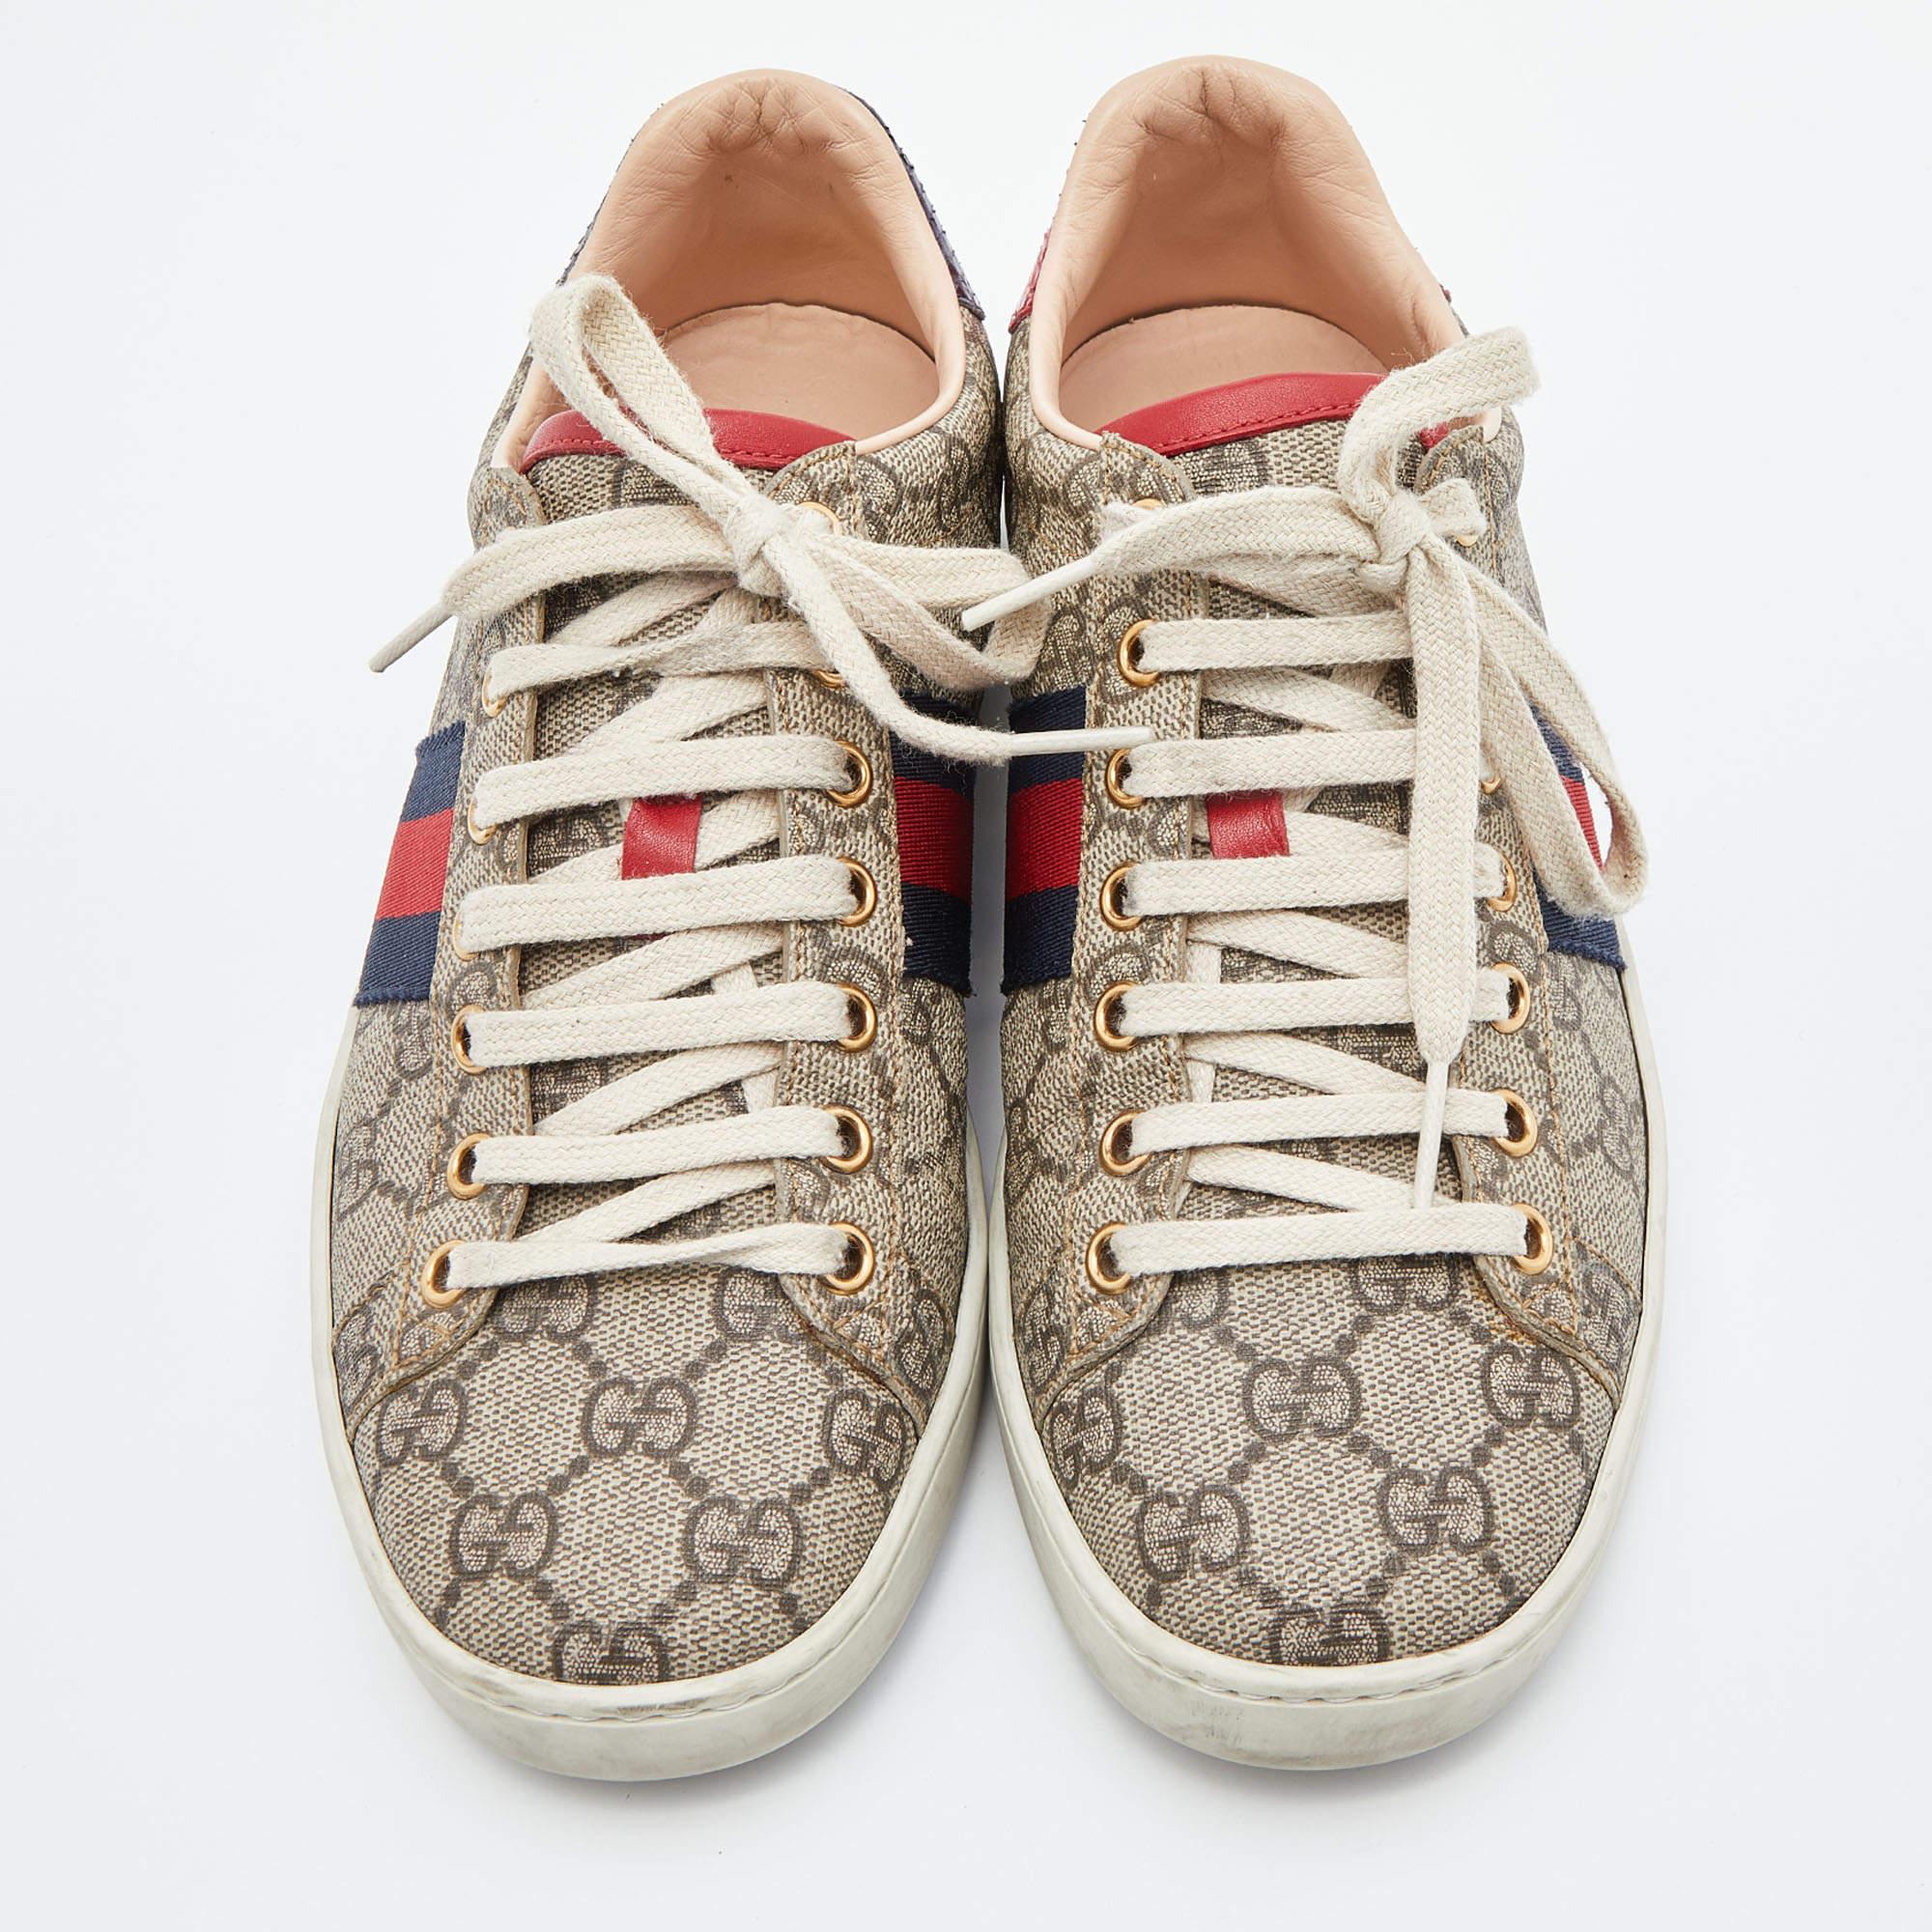 Stacked with signature details, this Gucci pair is rendered in GG Supreme canvas and is designed in a low-cut style with lace-up vamps. They have been fashioned with the iconic web lip detailing on the side. Complete with contrast trims carrying the